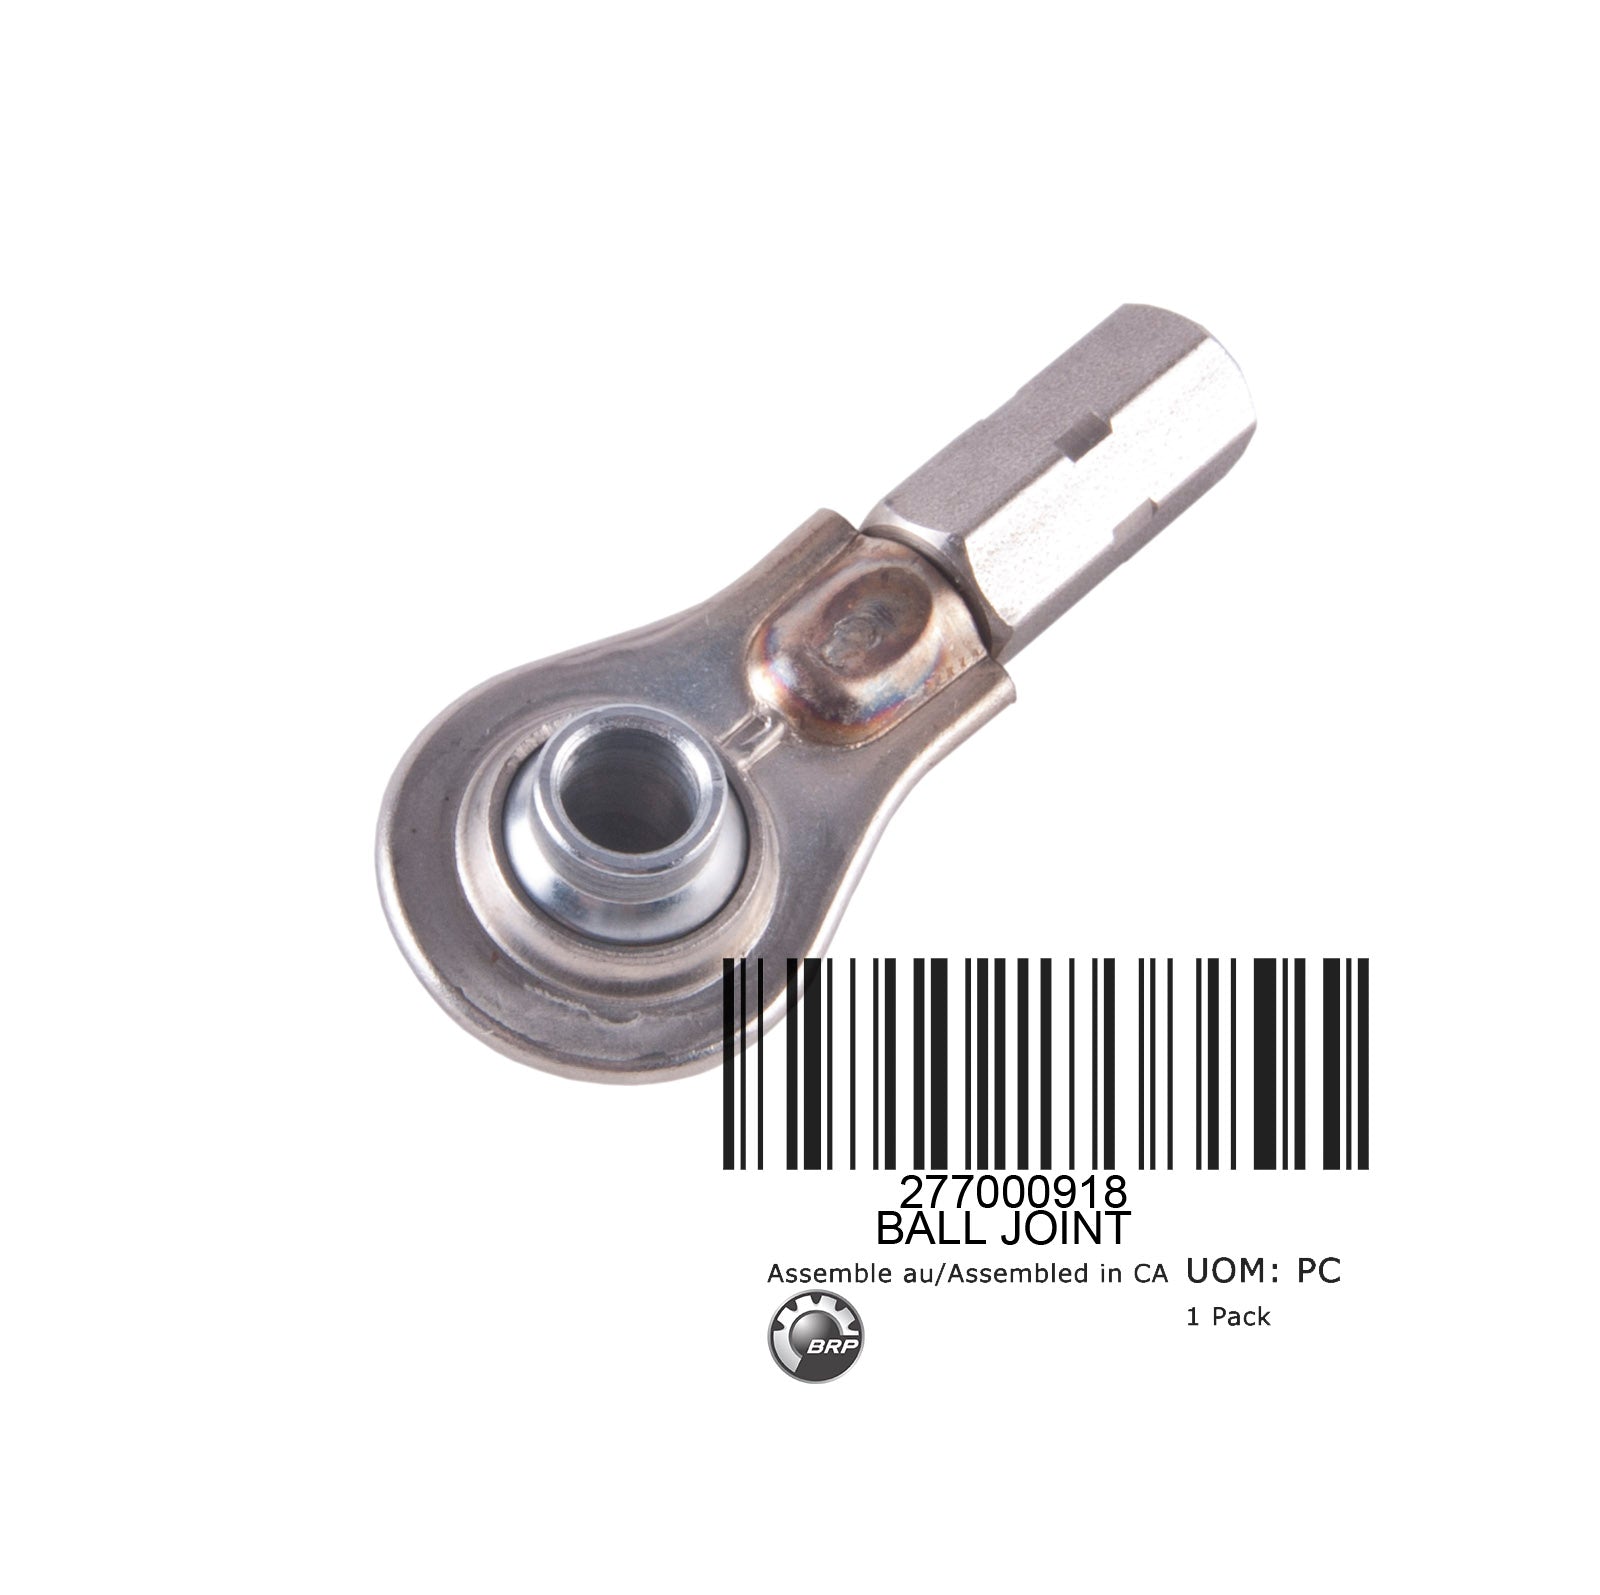 BALL JOINT VINTAGE PART